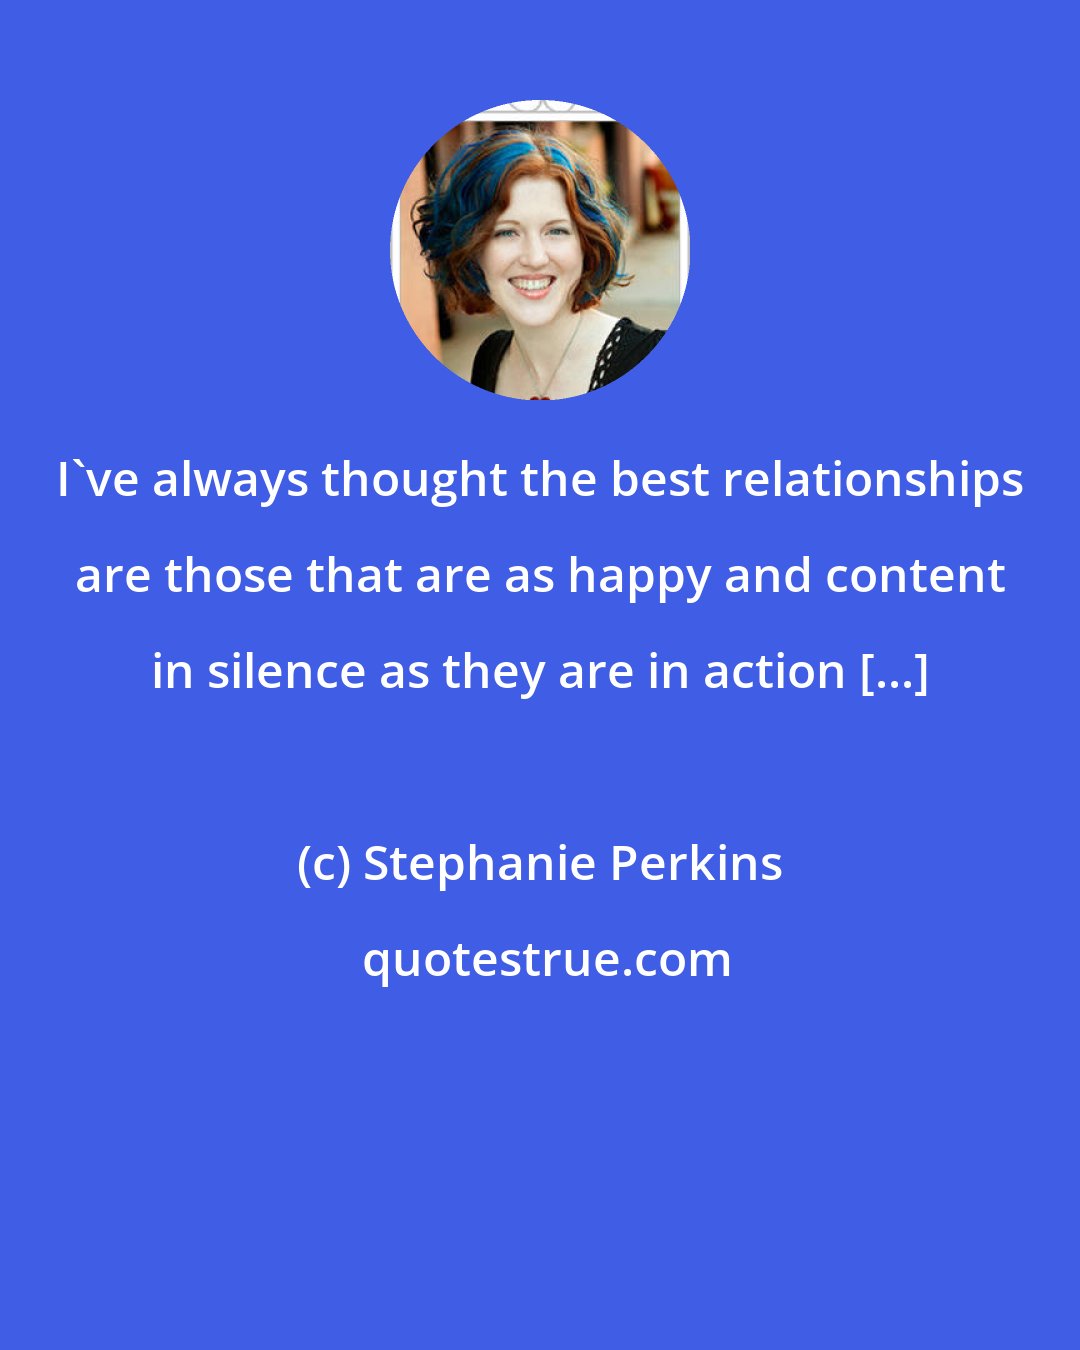 Stephanie Perkins: I've always thought the best relationships are those that are as happy and content in silence as they are in action [...]